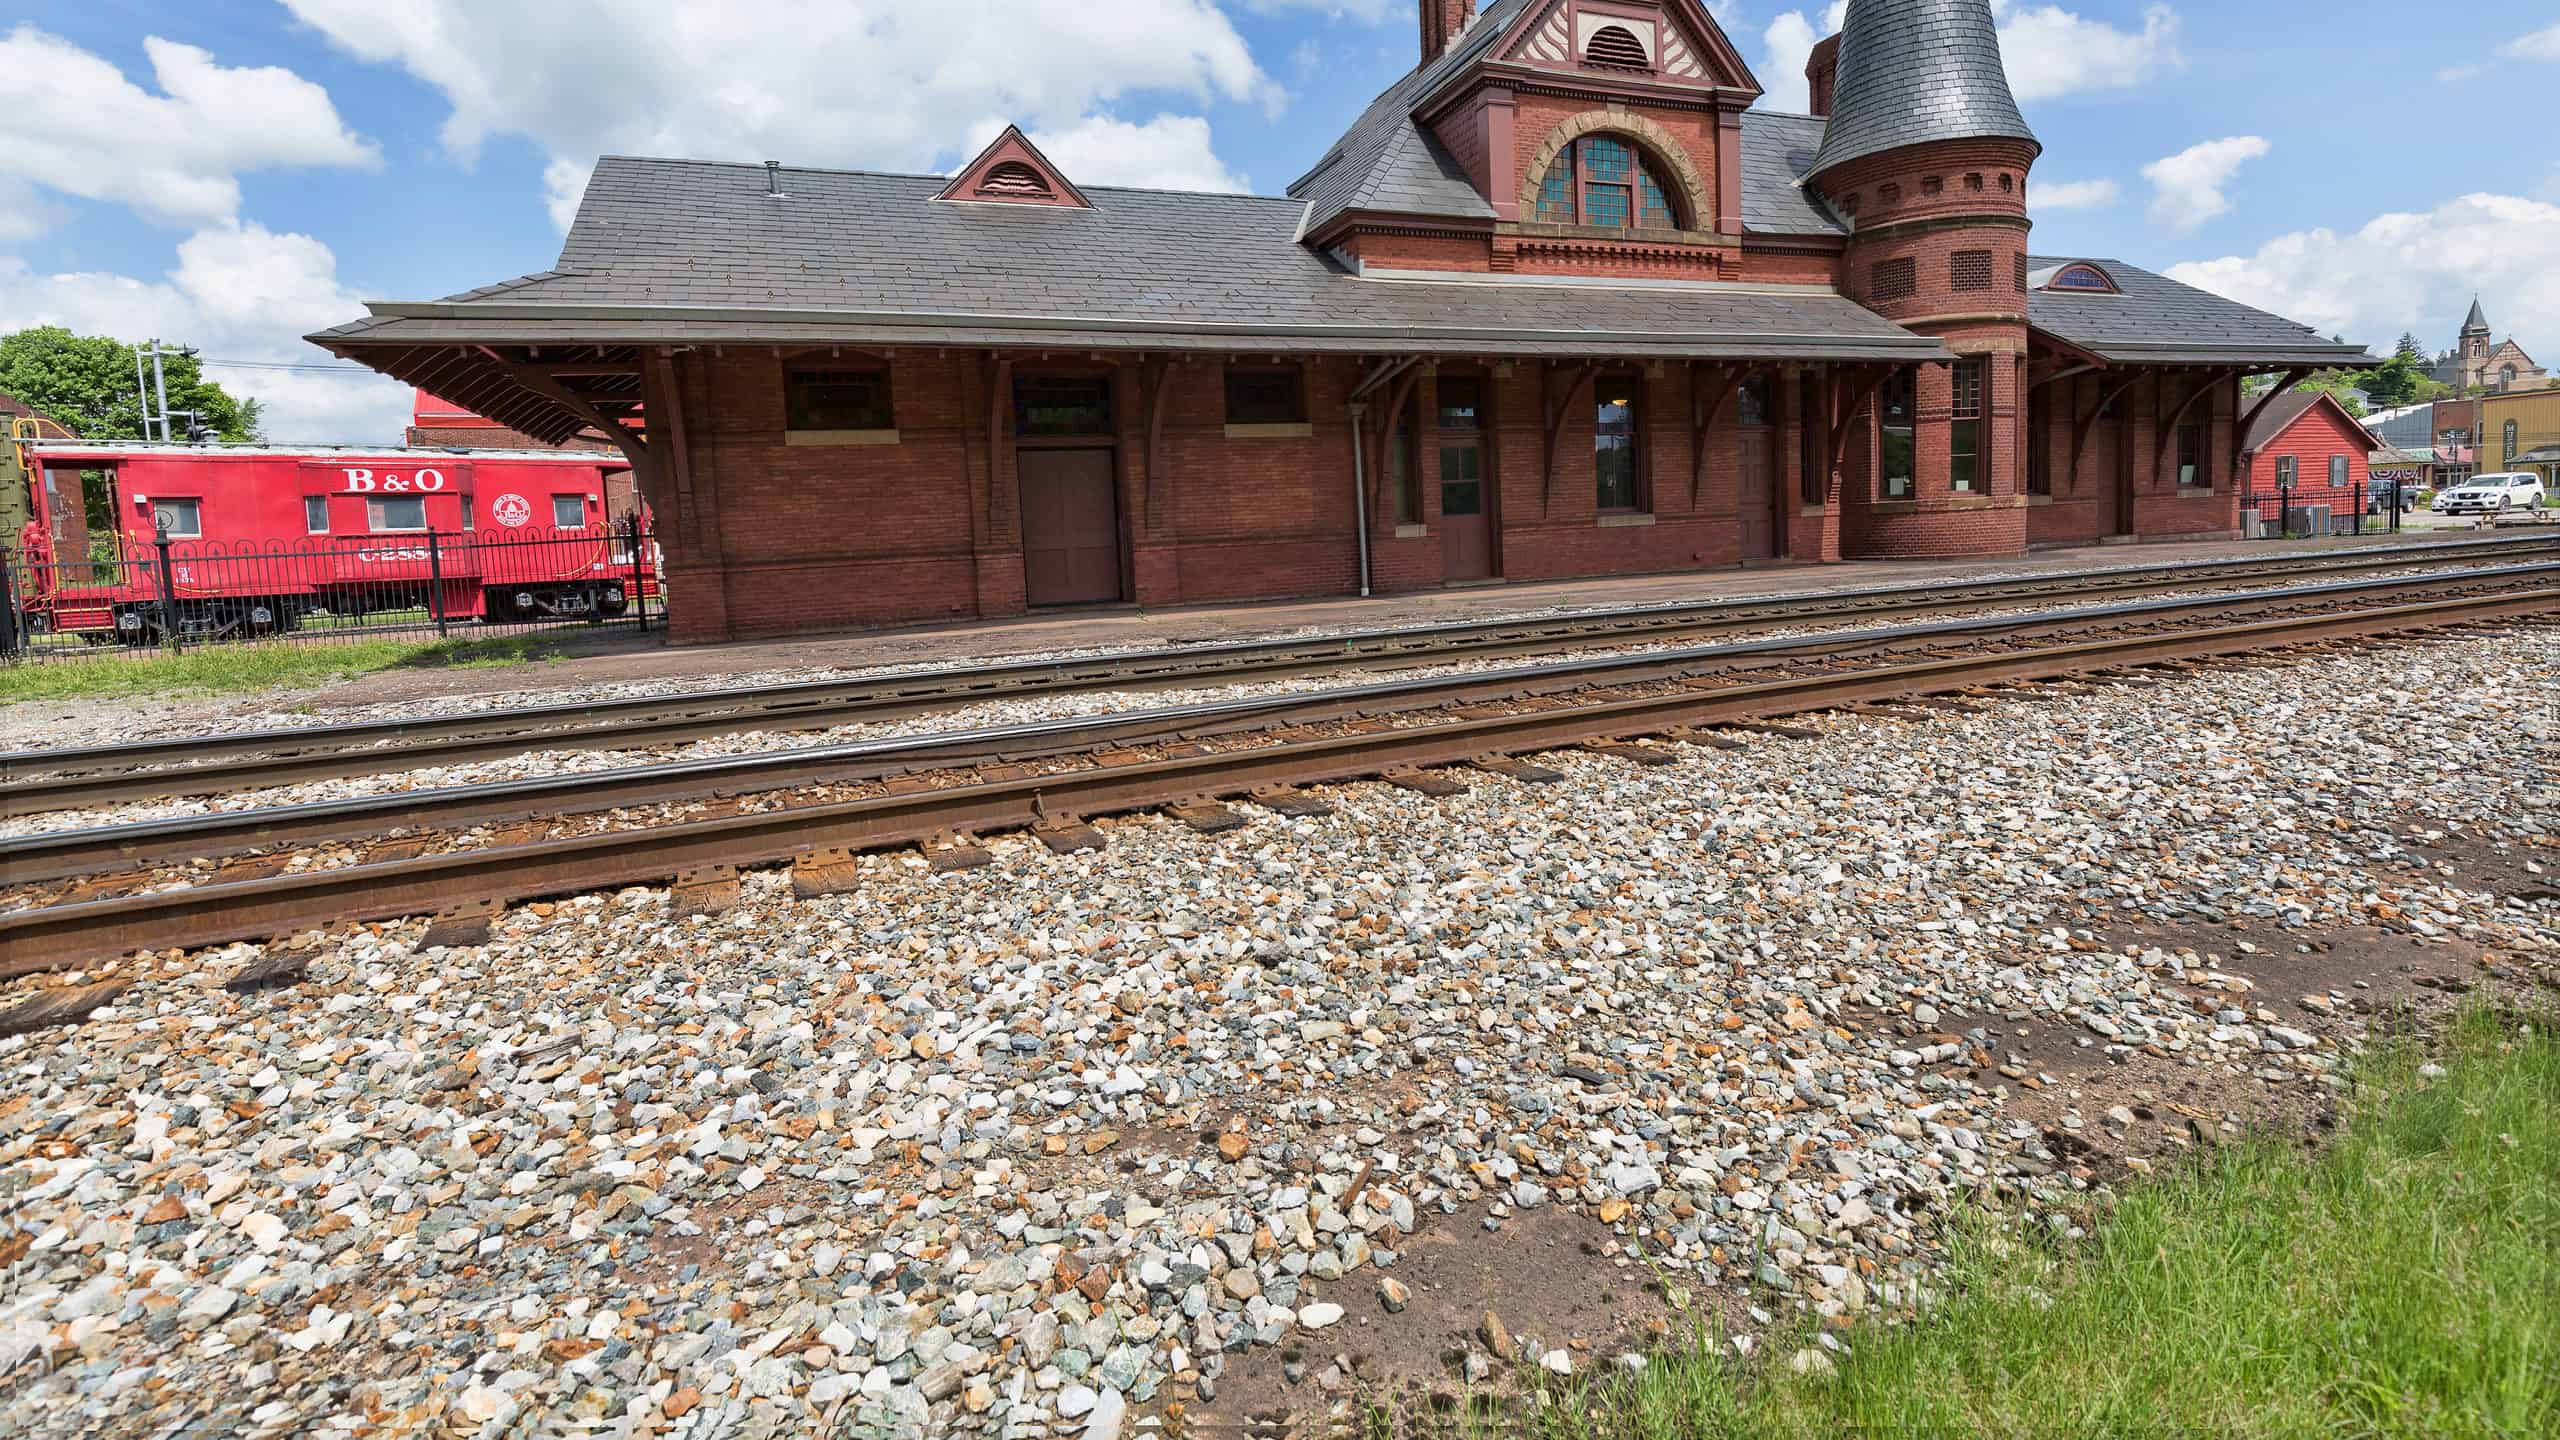 Baltimore and Ohio Railroad Station in Oakland, Maryland - Snowiest Place in Maryland